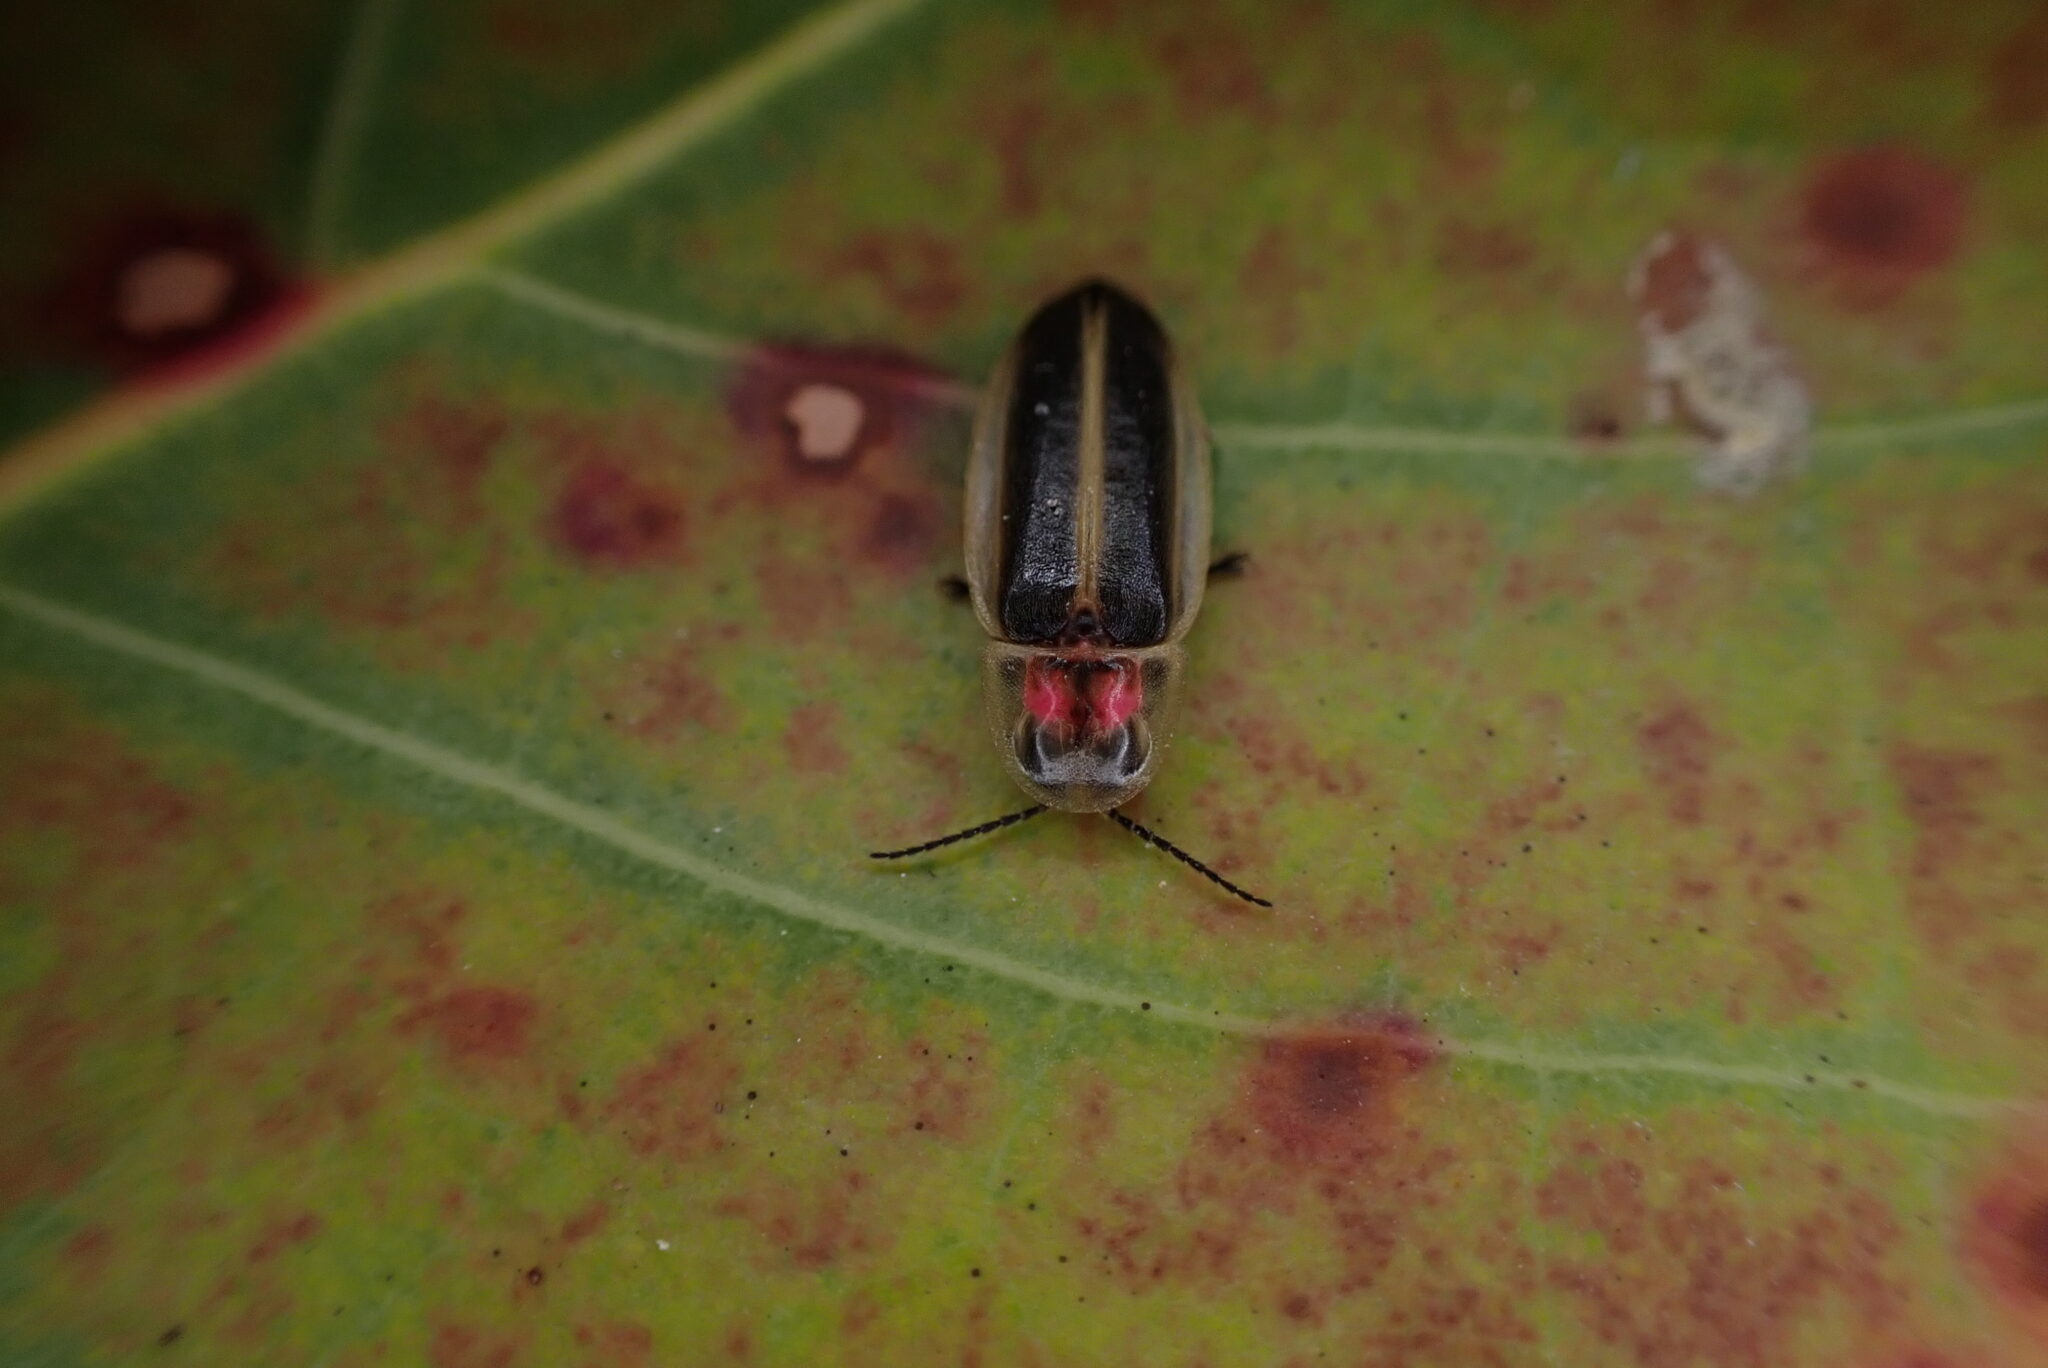 A firefly with black, yellow, and pink markings rests on a leaf.